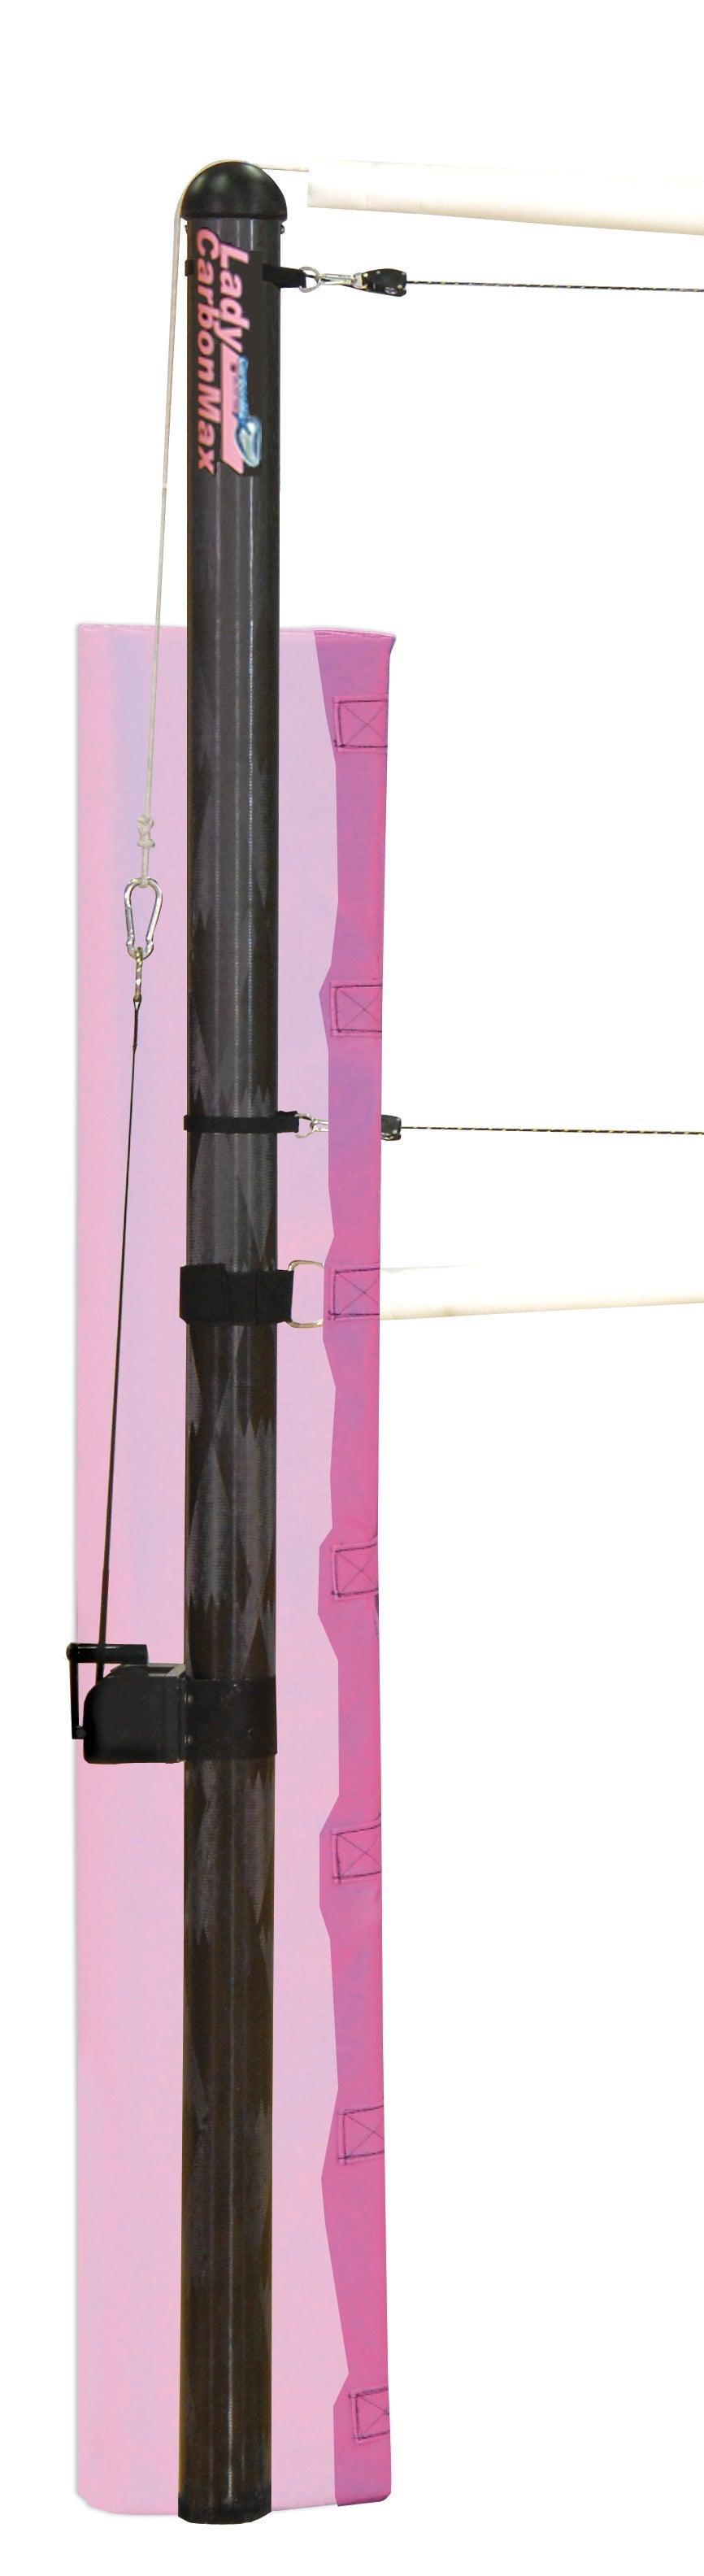 Lady CarbonMax Composite System without Padding - bisoninc